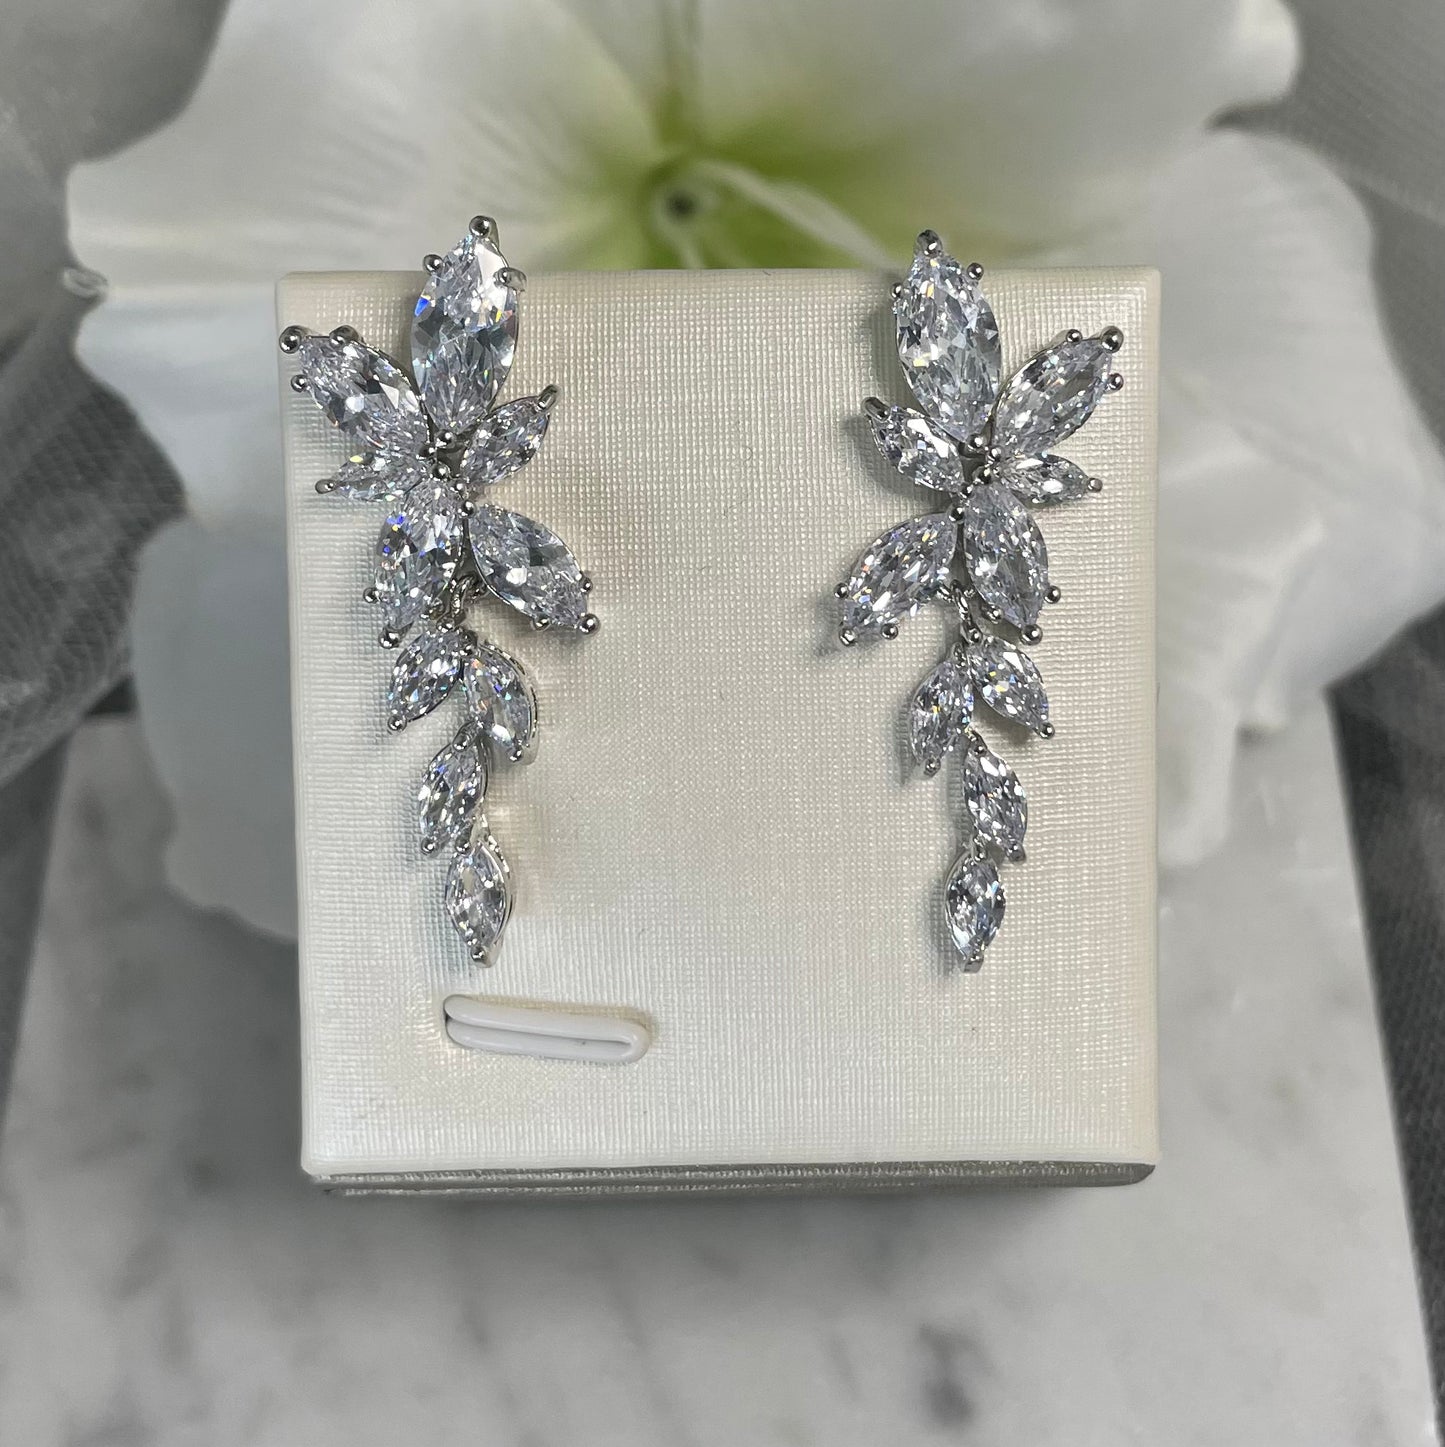 Lizzy cubic zirconia bridal earrings with cascading flower-shaped and leaf-like crystals, designed for sophisticated sparkle and elegance on your wedding day.